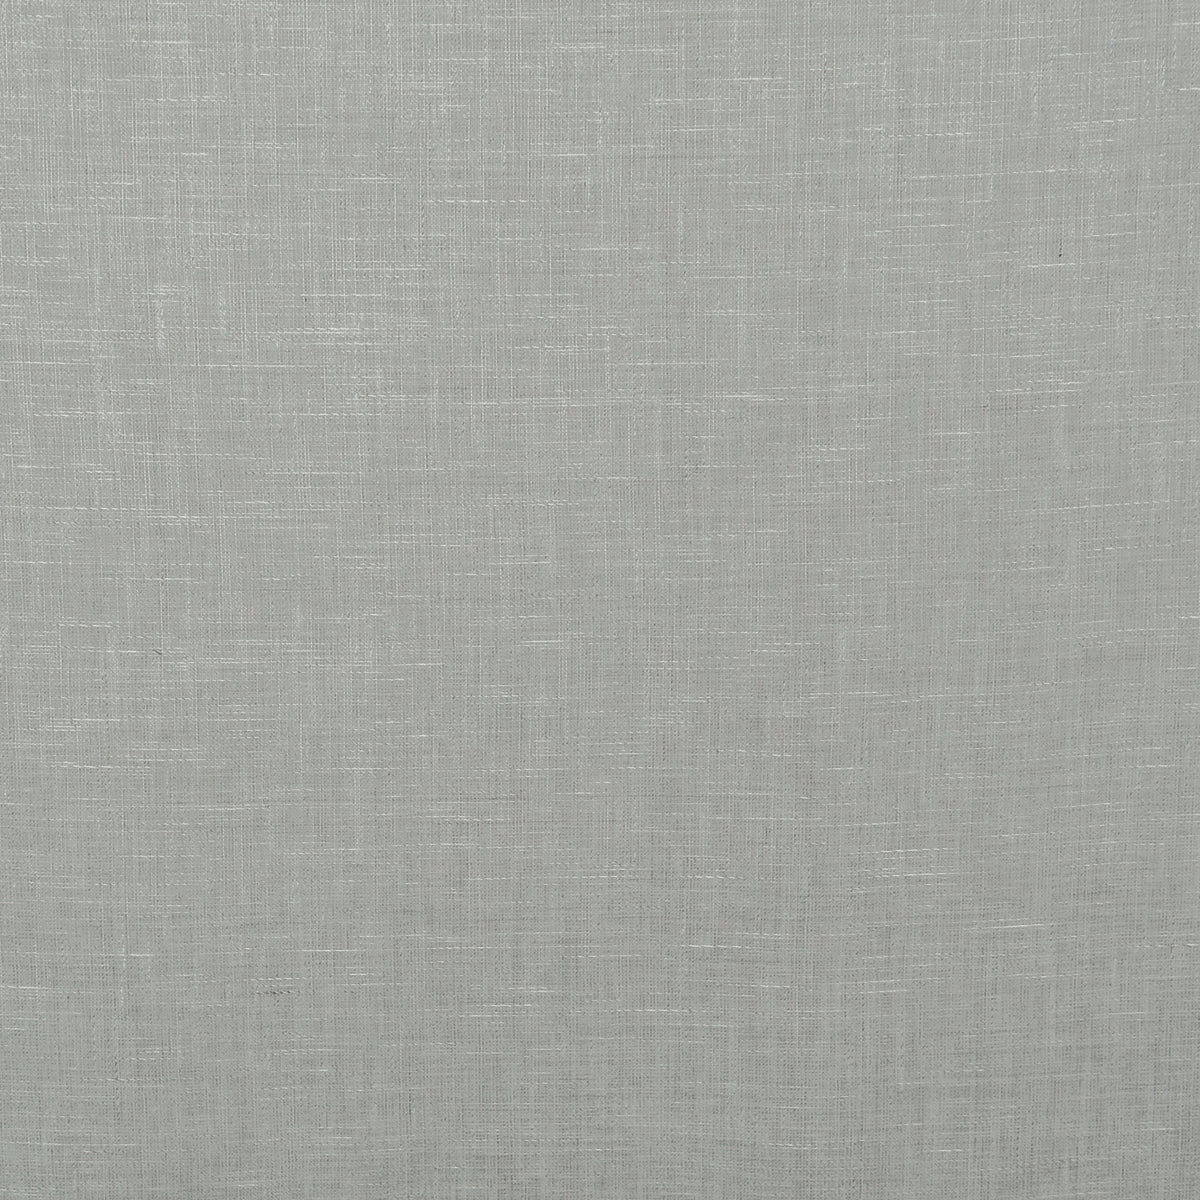 Day curtain pale gray Sea